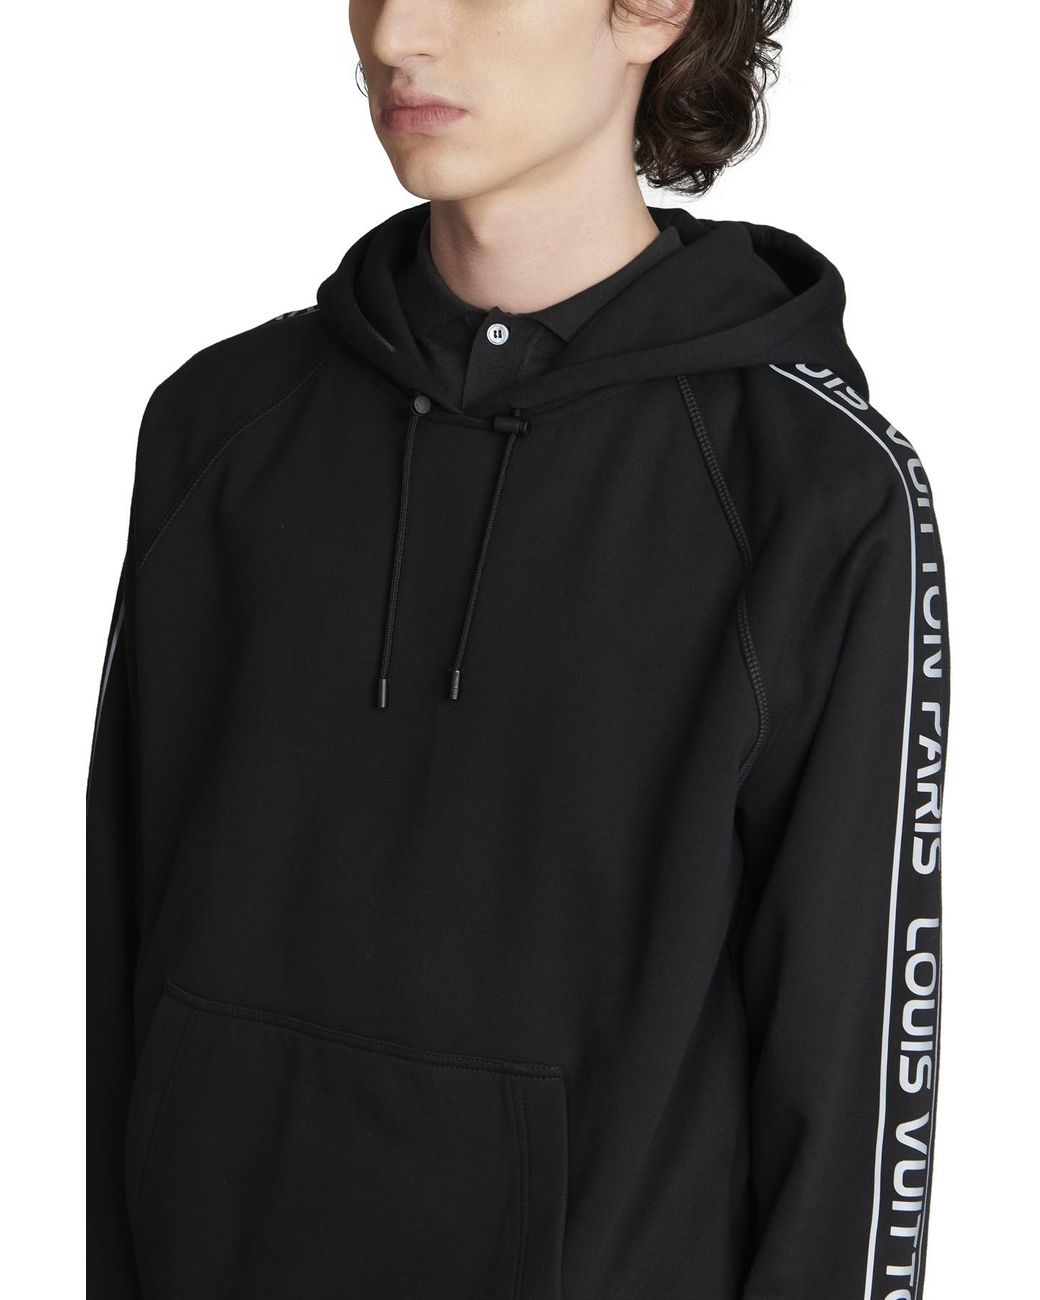 Louis Vuitton Embroidered Signature Cotton Hoodie